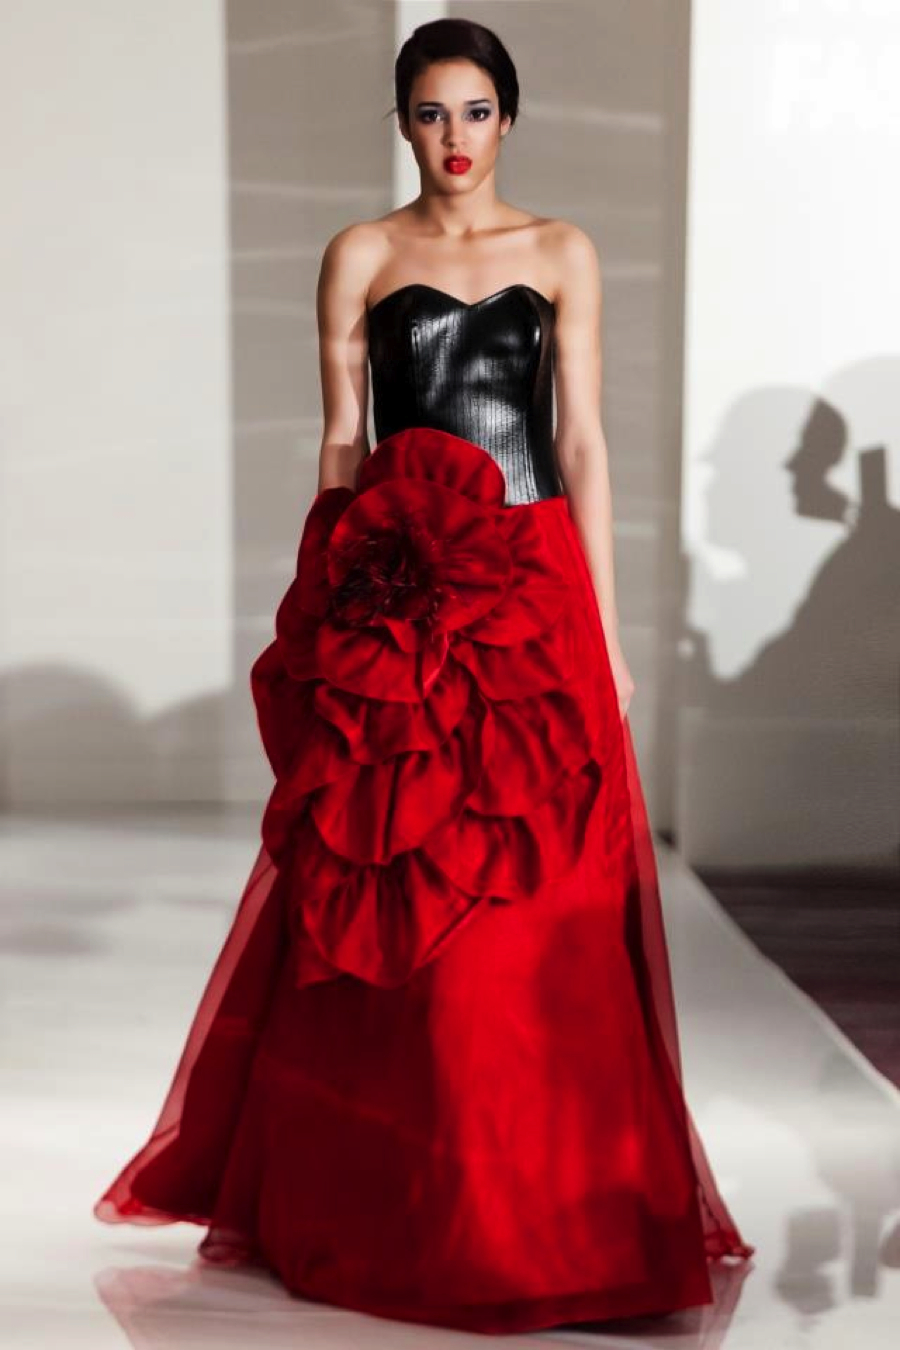 Original Kate Walz gown on the runway at New York Fashion Week. Photo by Kate Walz. 